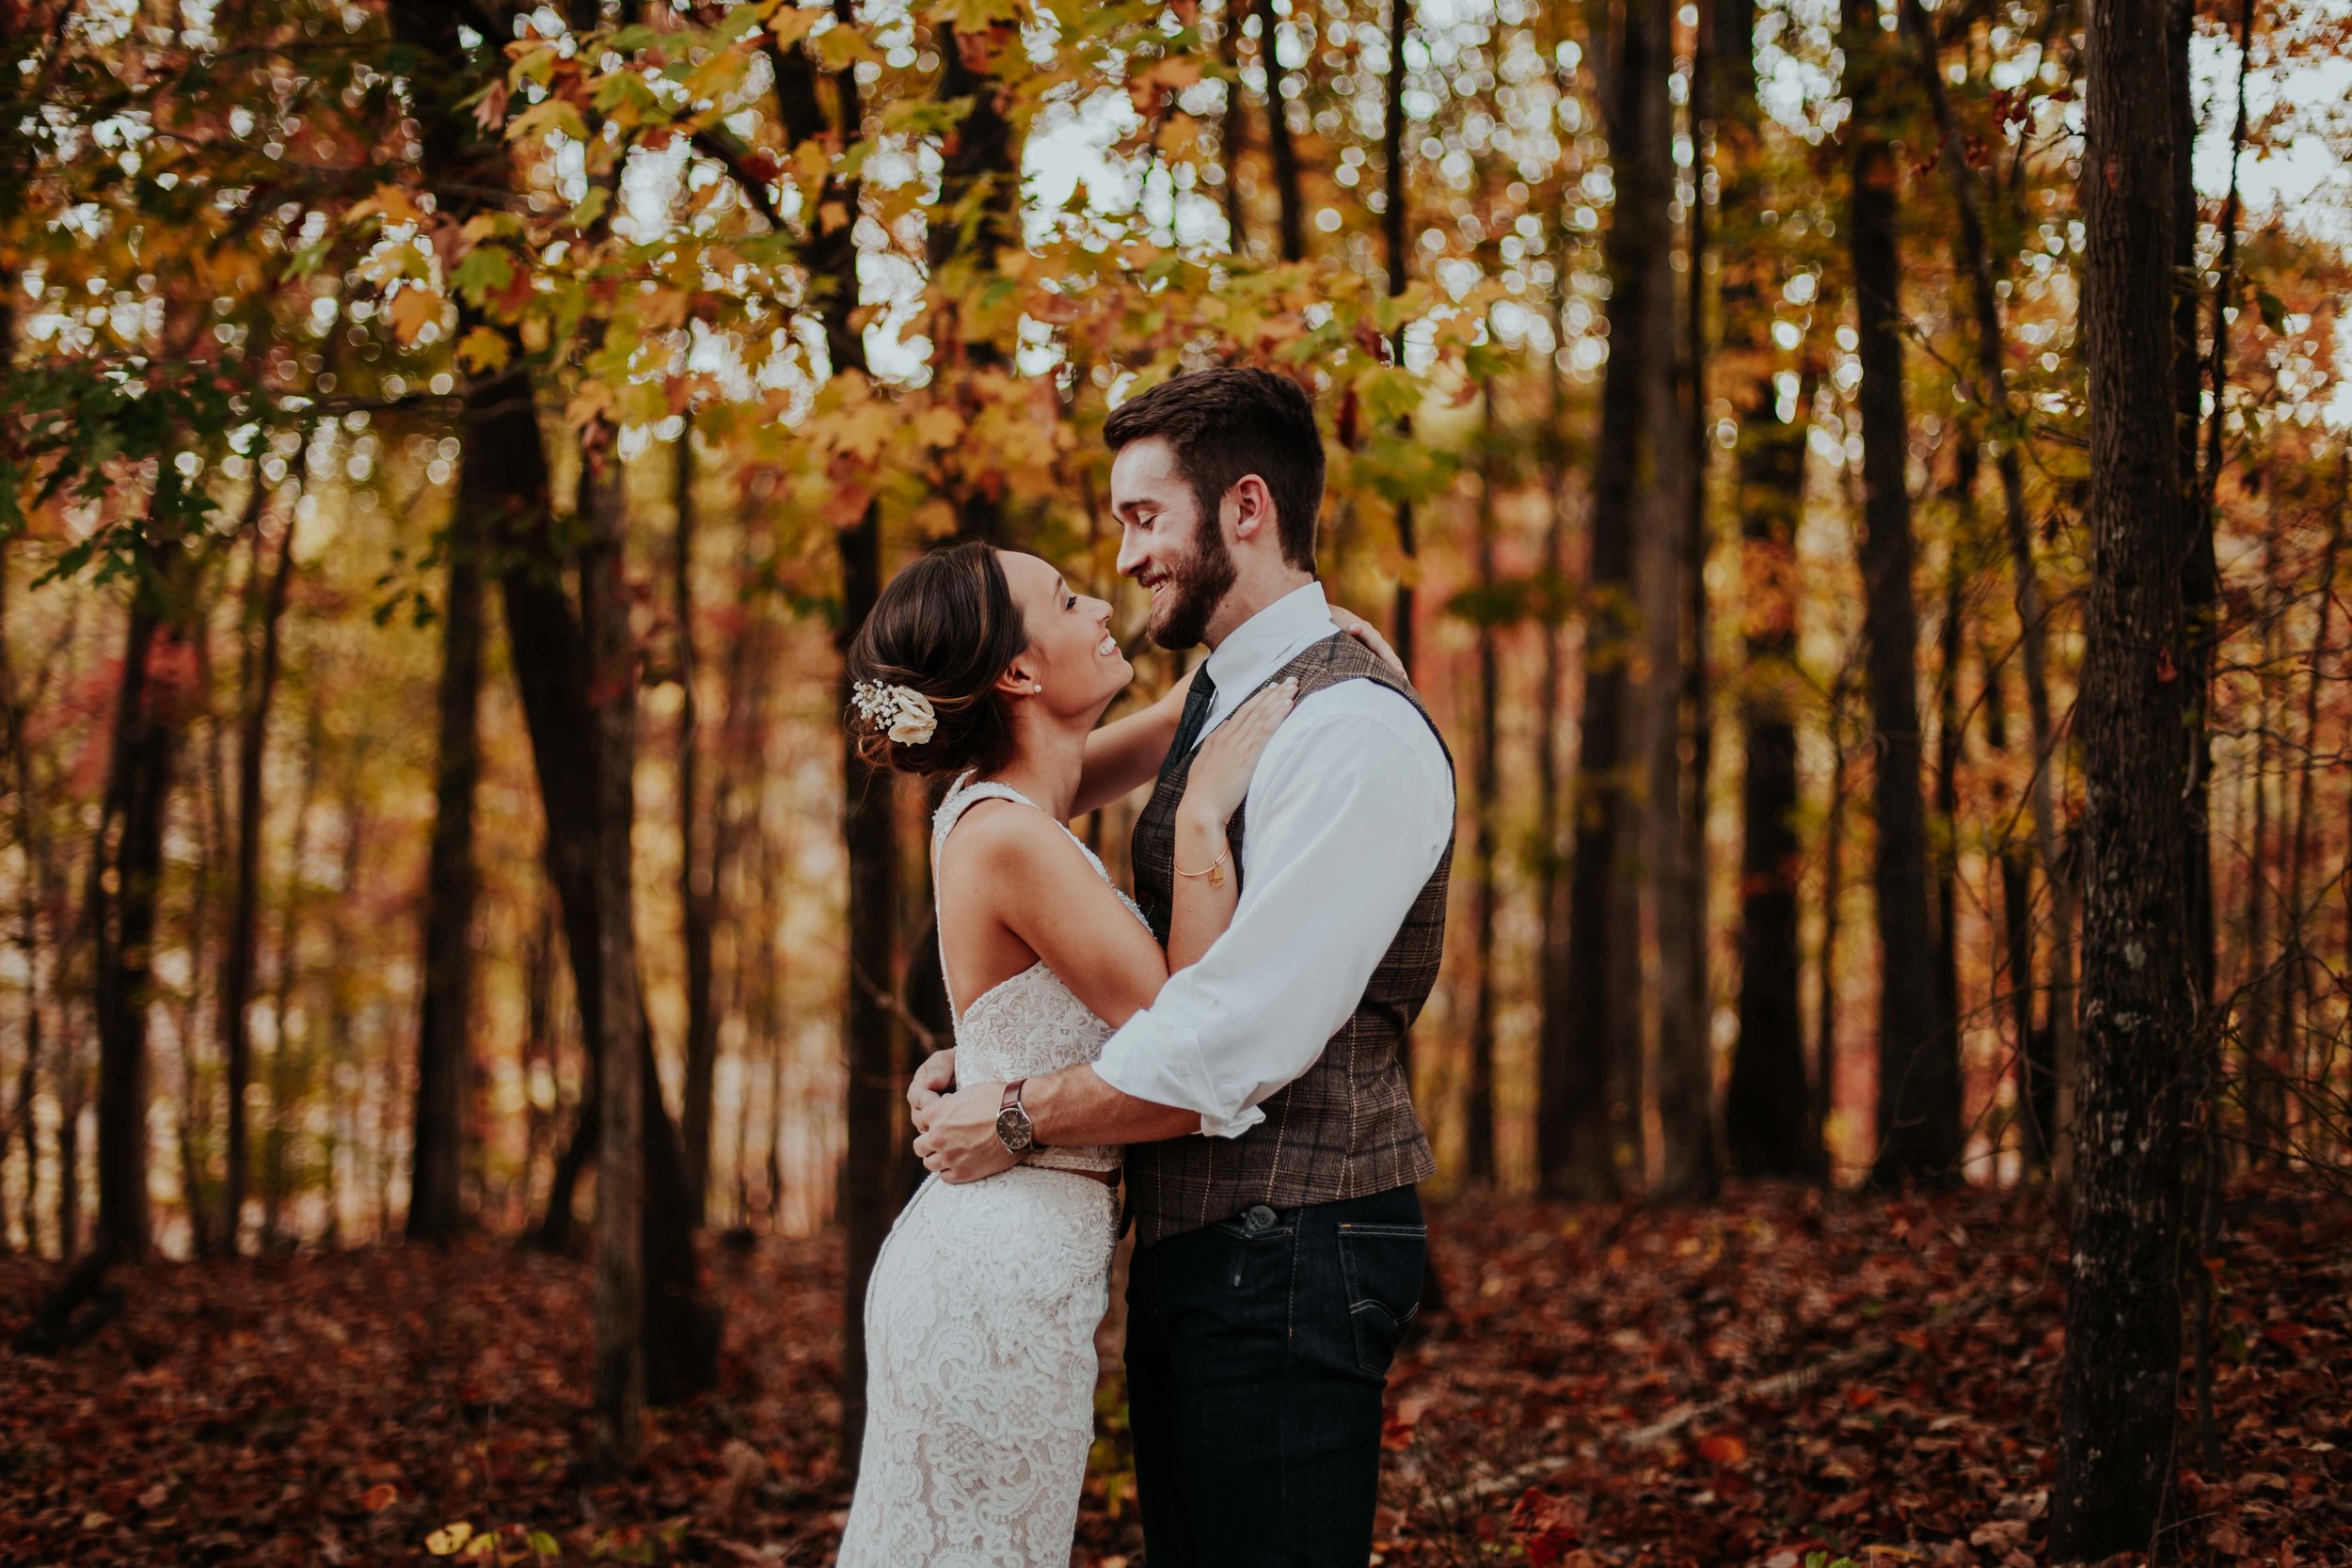 most gorgeous bridal party photos- Top Nashville Wedding Photographer  by Emily Anne Photography  shot in Leiper's Fork Franklin TN